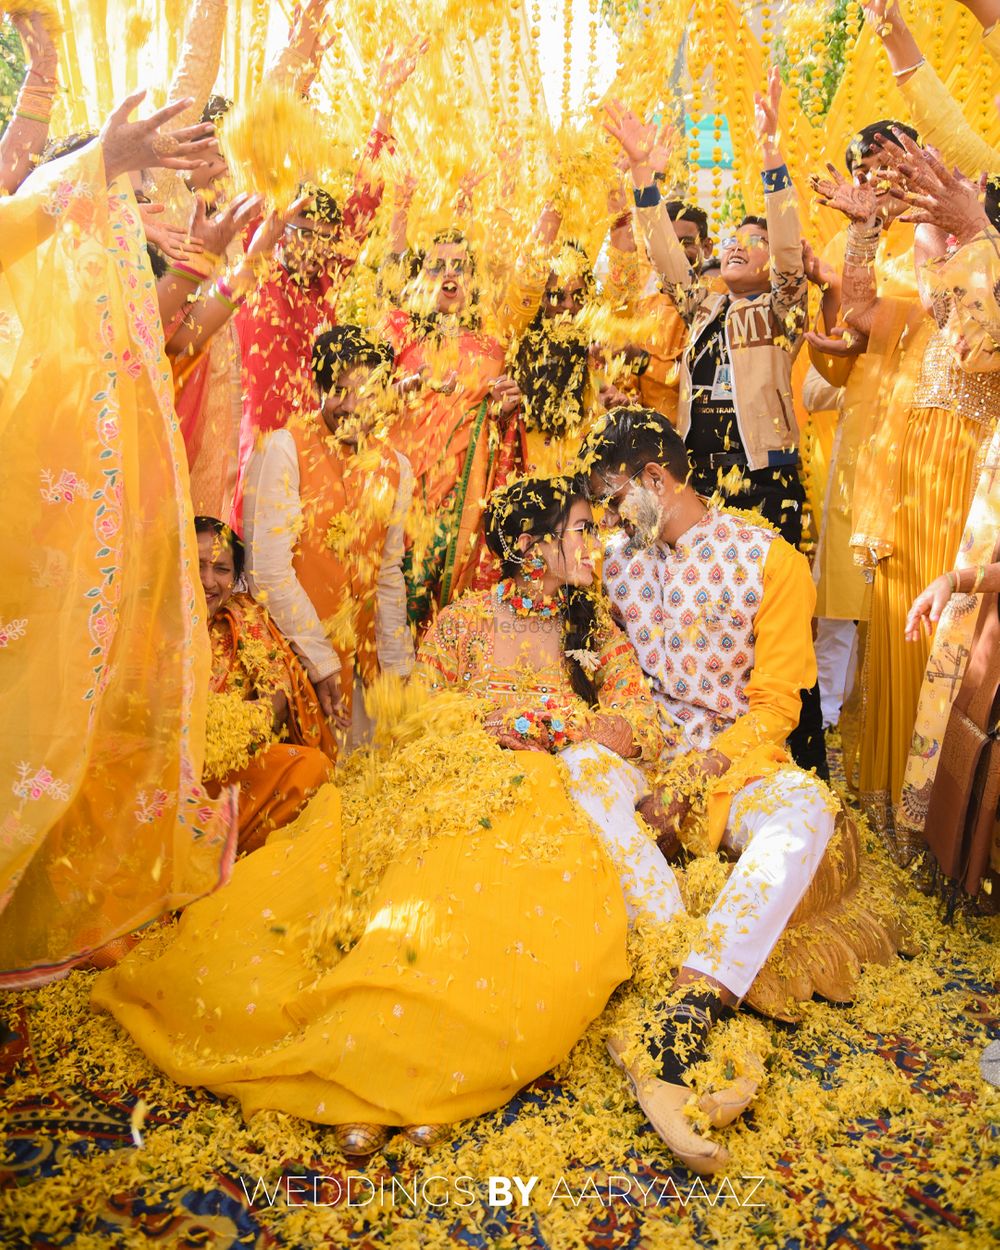 Photo From Akshat and mohini haldi day - By Weddings by Aaryaaaz